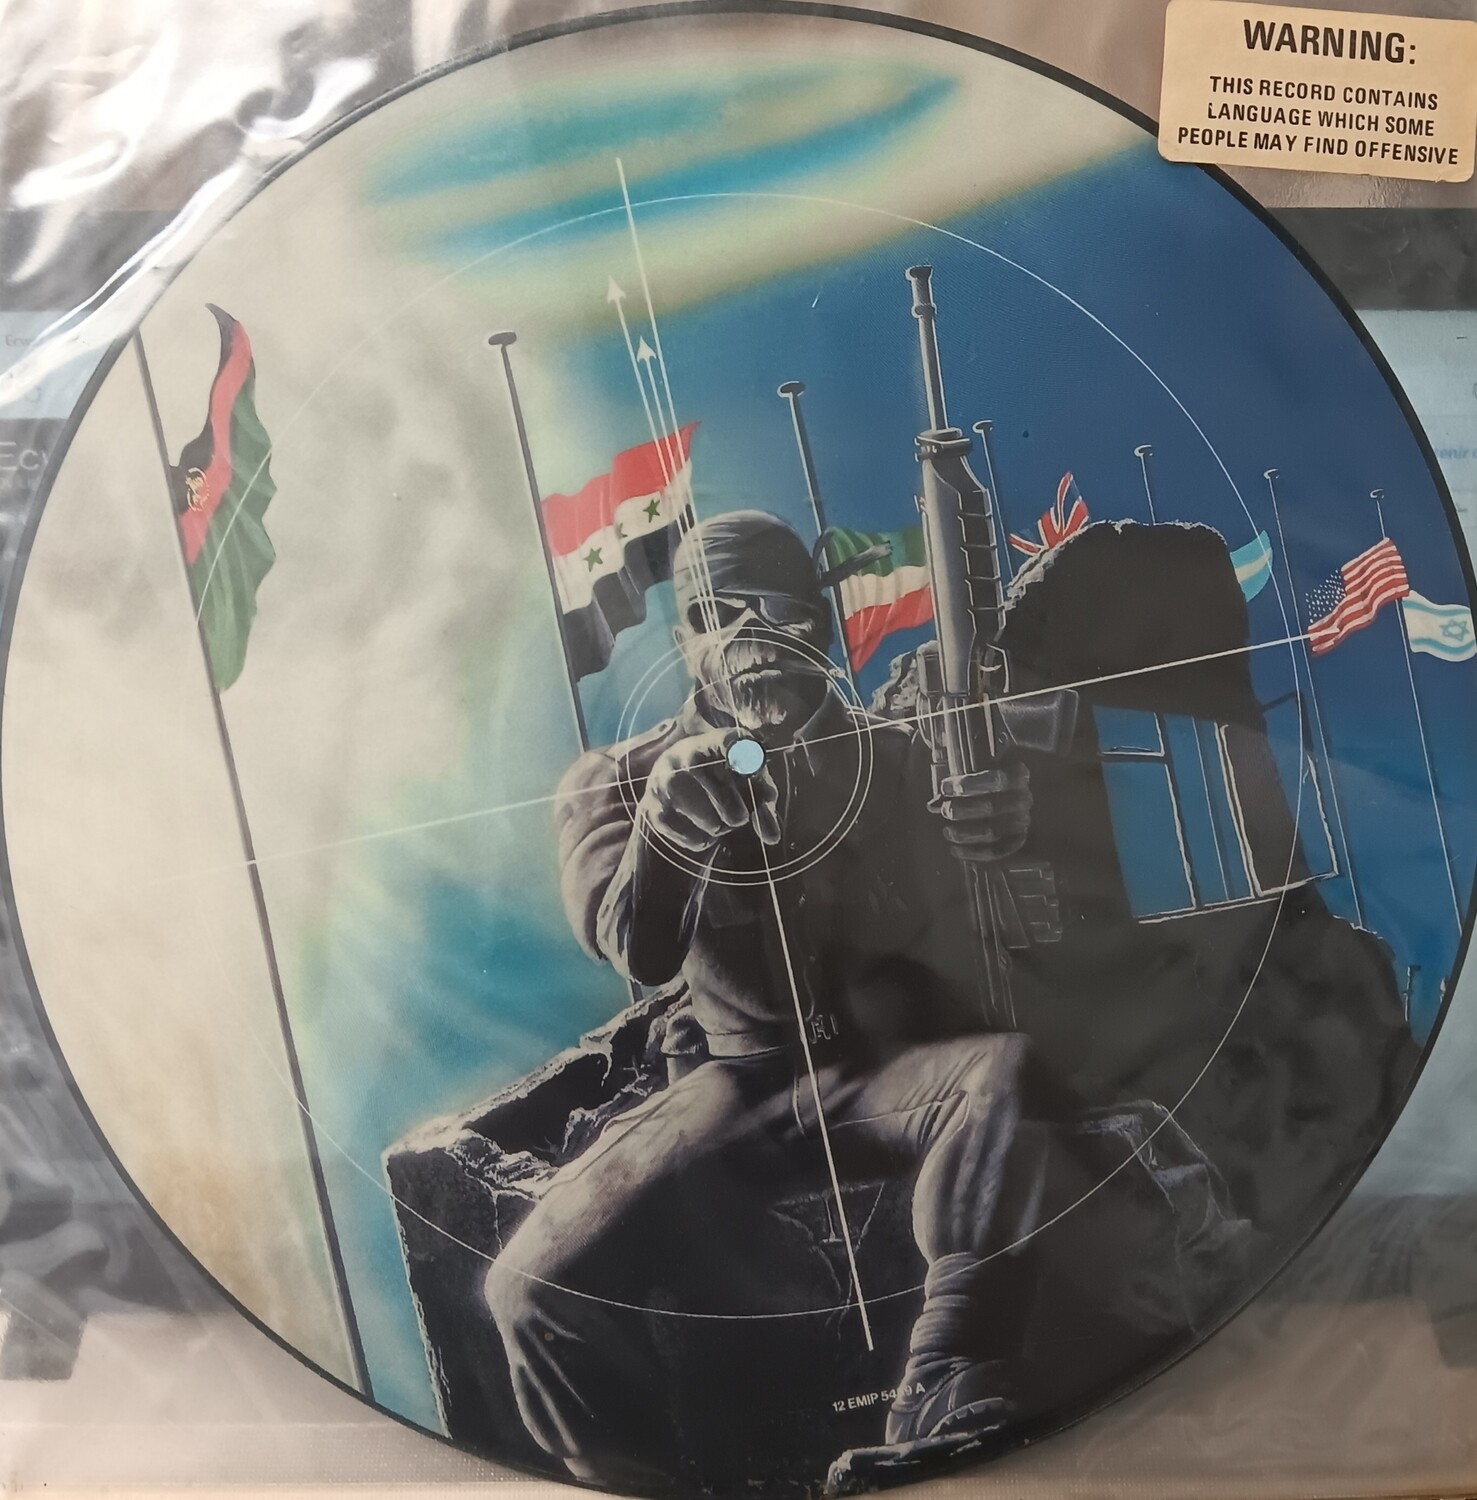 IRON MAIDEN - 2 Minutes to midnight (Picture disc)